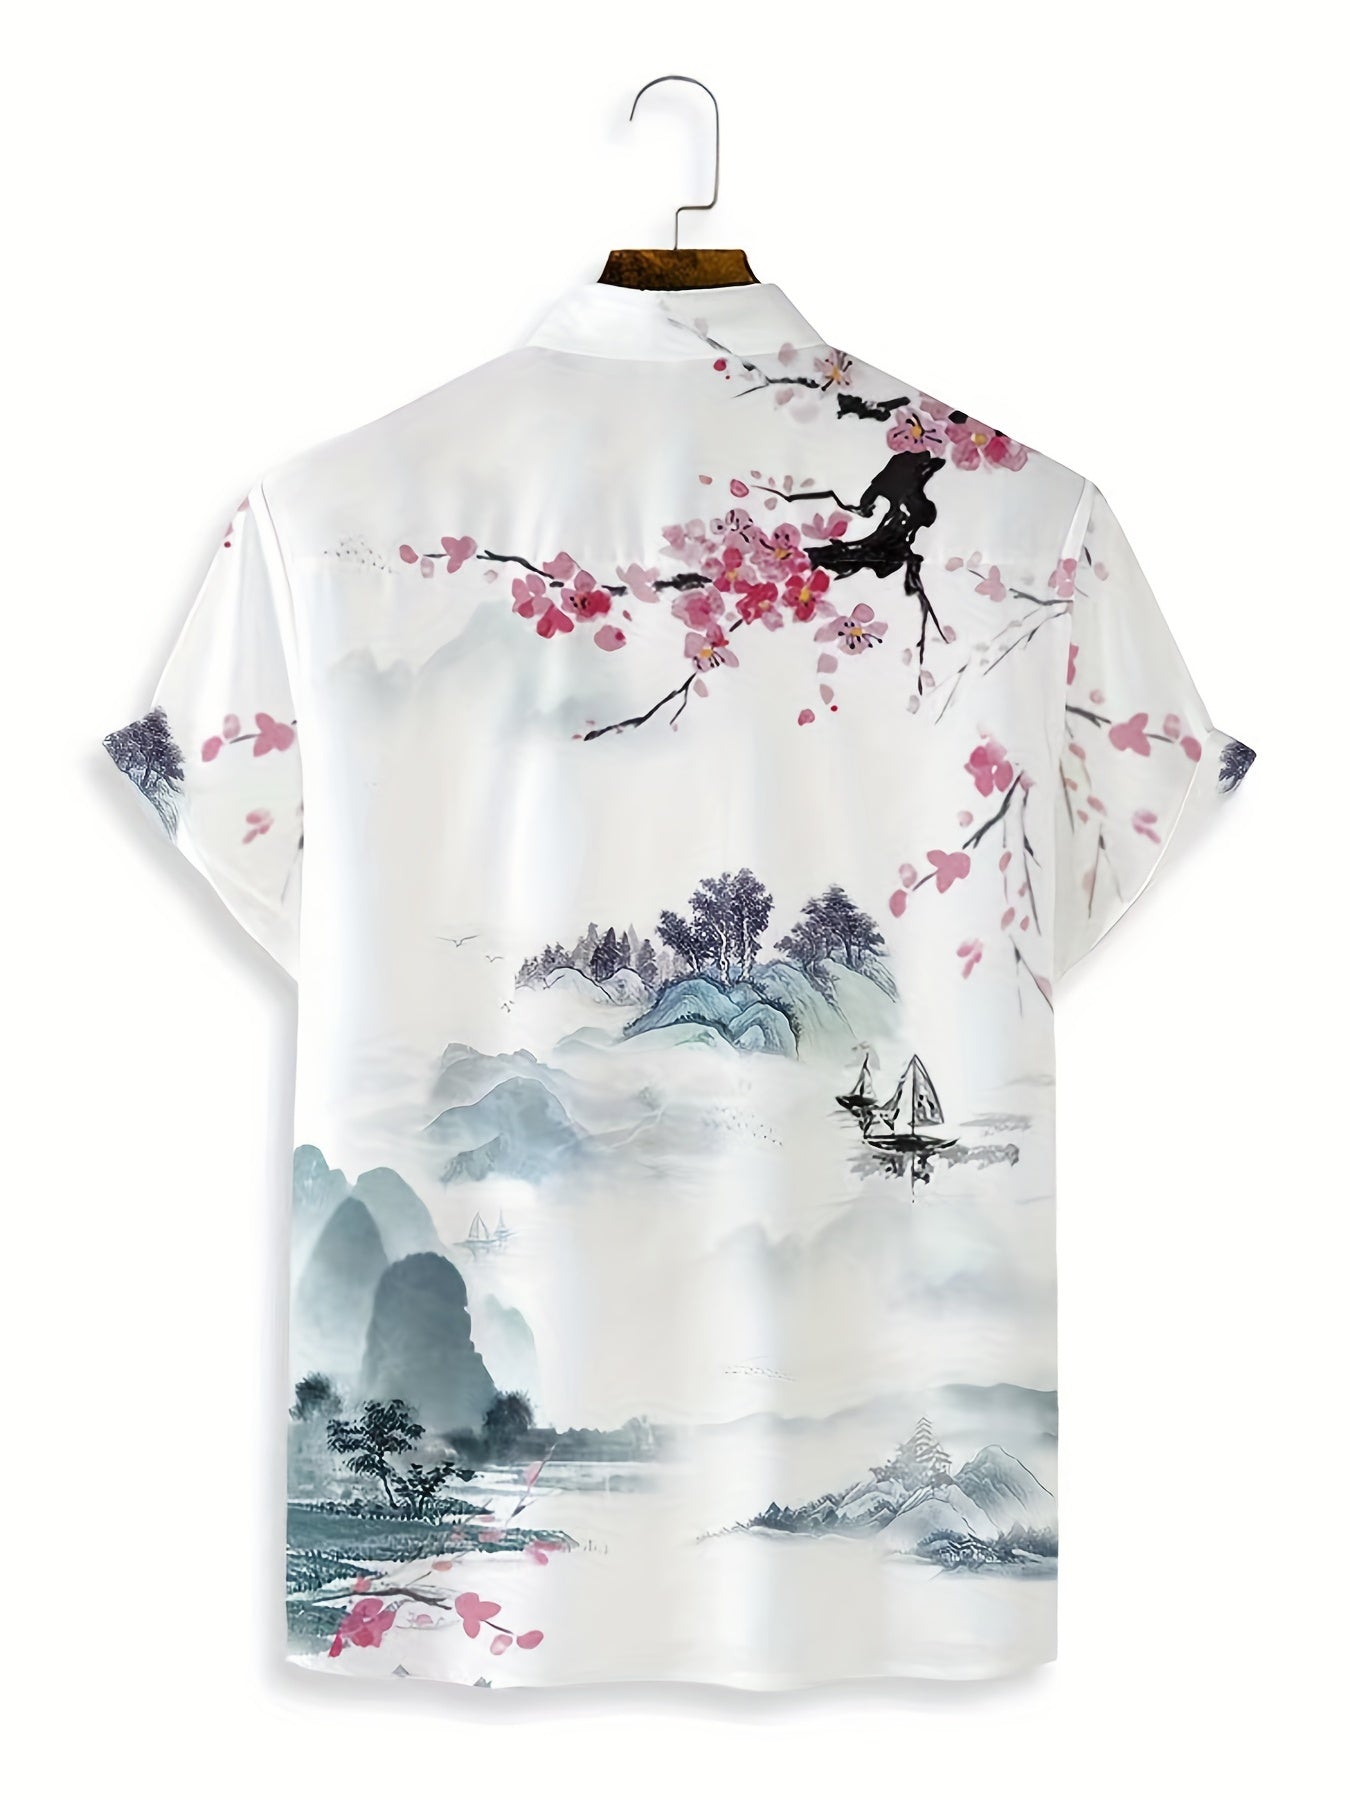 TM Special Landscape Painting Pattern, Lapel Shirt For Summer Holiday